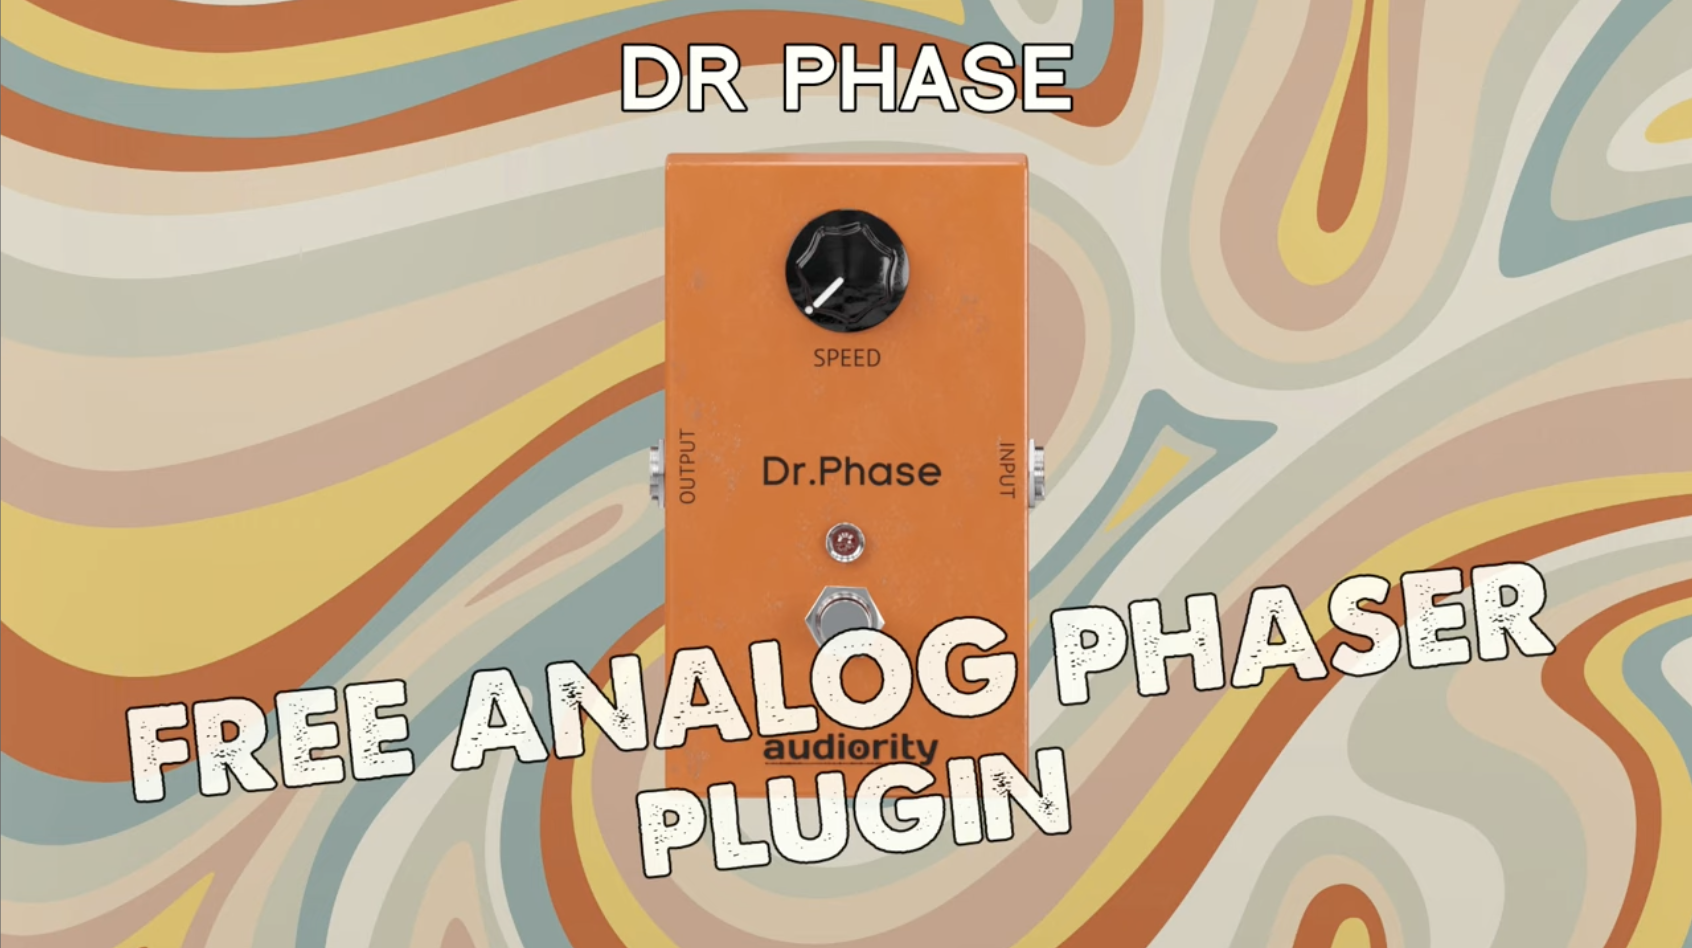 Dr Phase phaser plugin adds a groovy pulse to your tracks